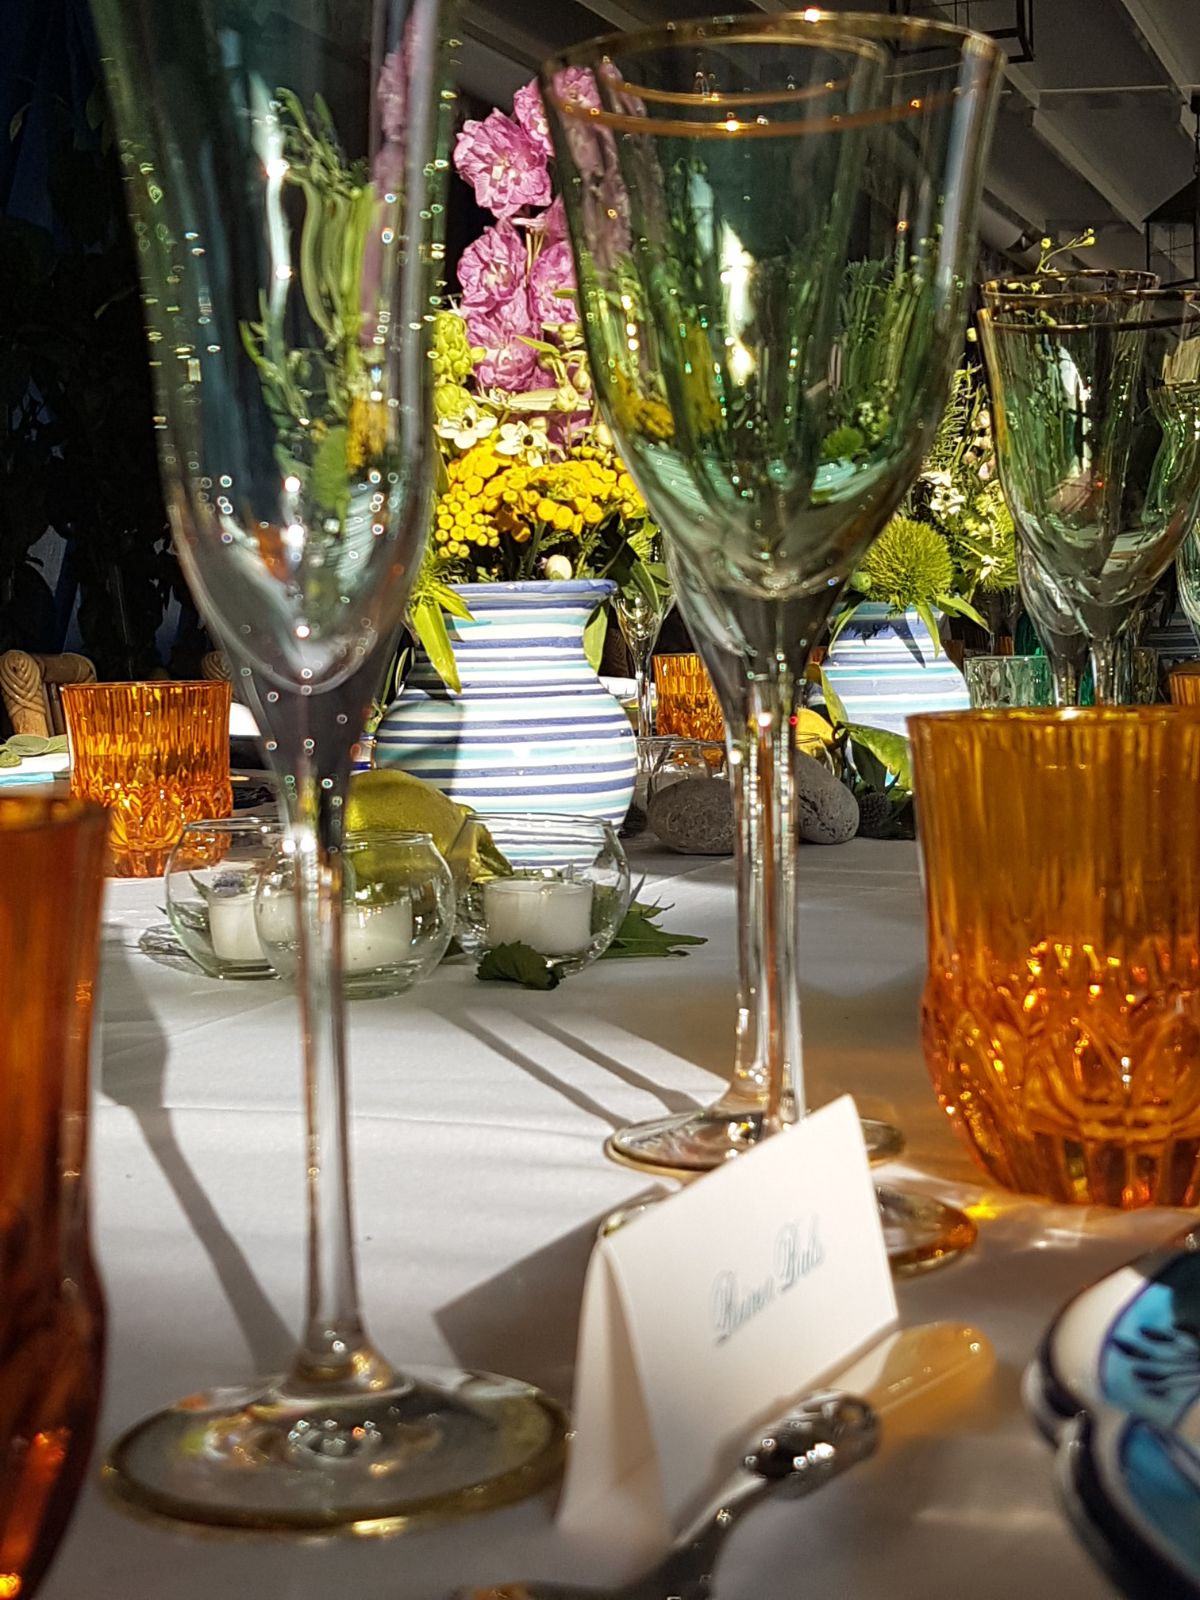 https://www.weddingamalfi.com/wp-content/uploads/Anna-and-Charles-wedding-table-colorful-decorations-with-flowers-and-place-card.jpg